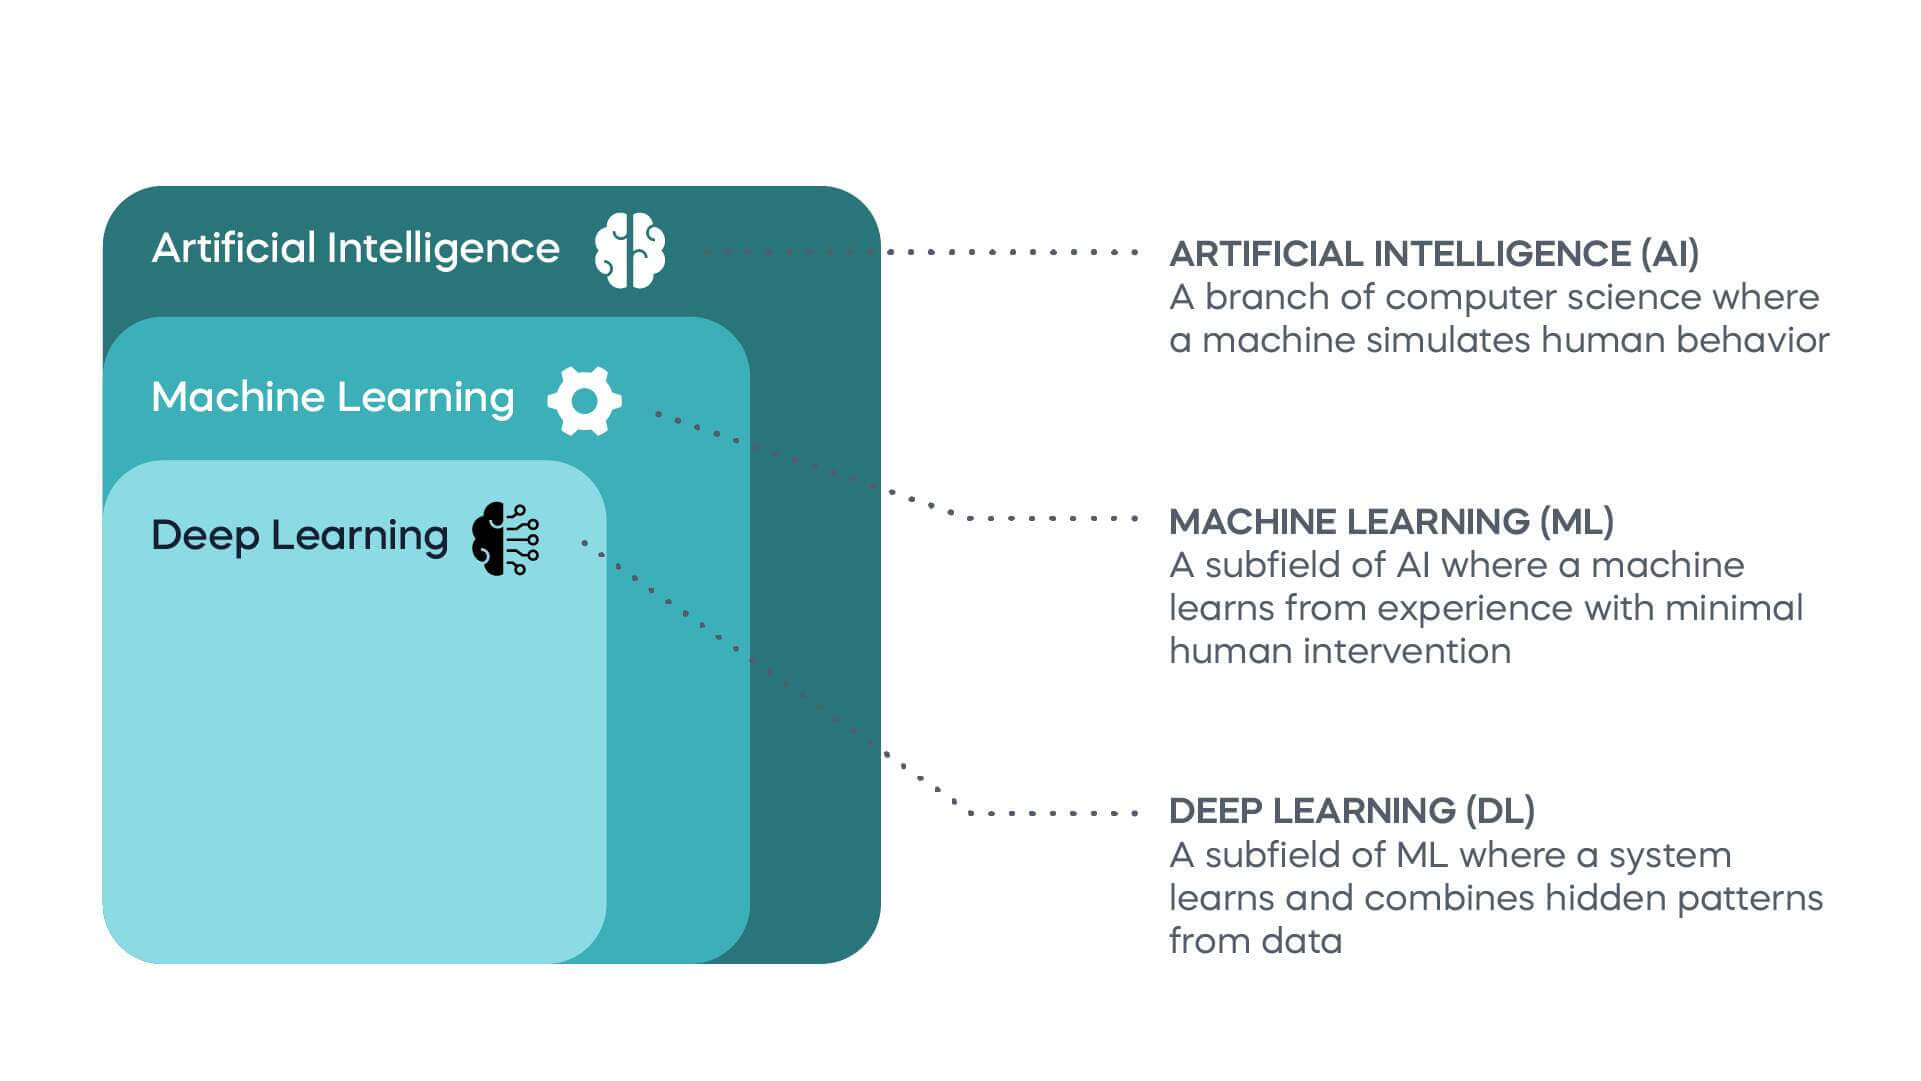 The differences between machine learning (ML), deep learning (DL), and artificial intelligence (AI).